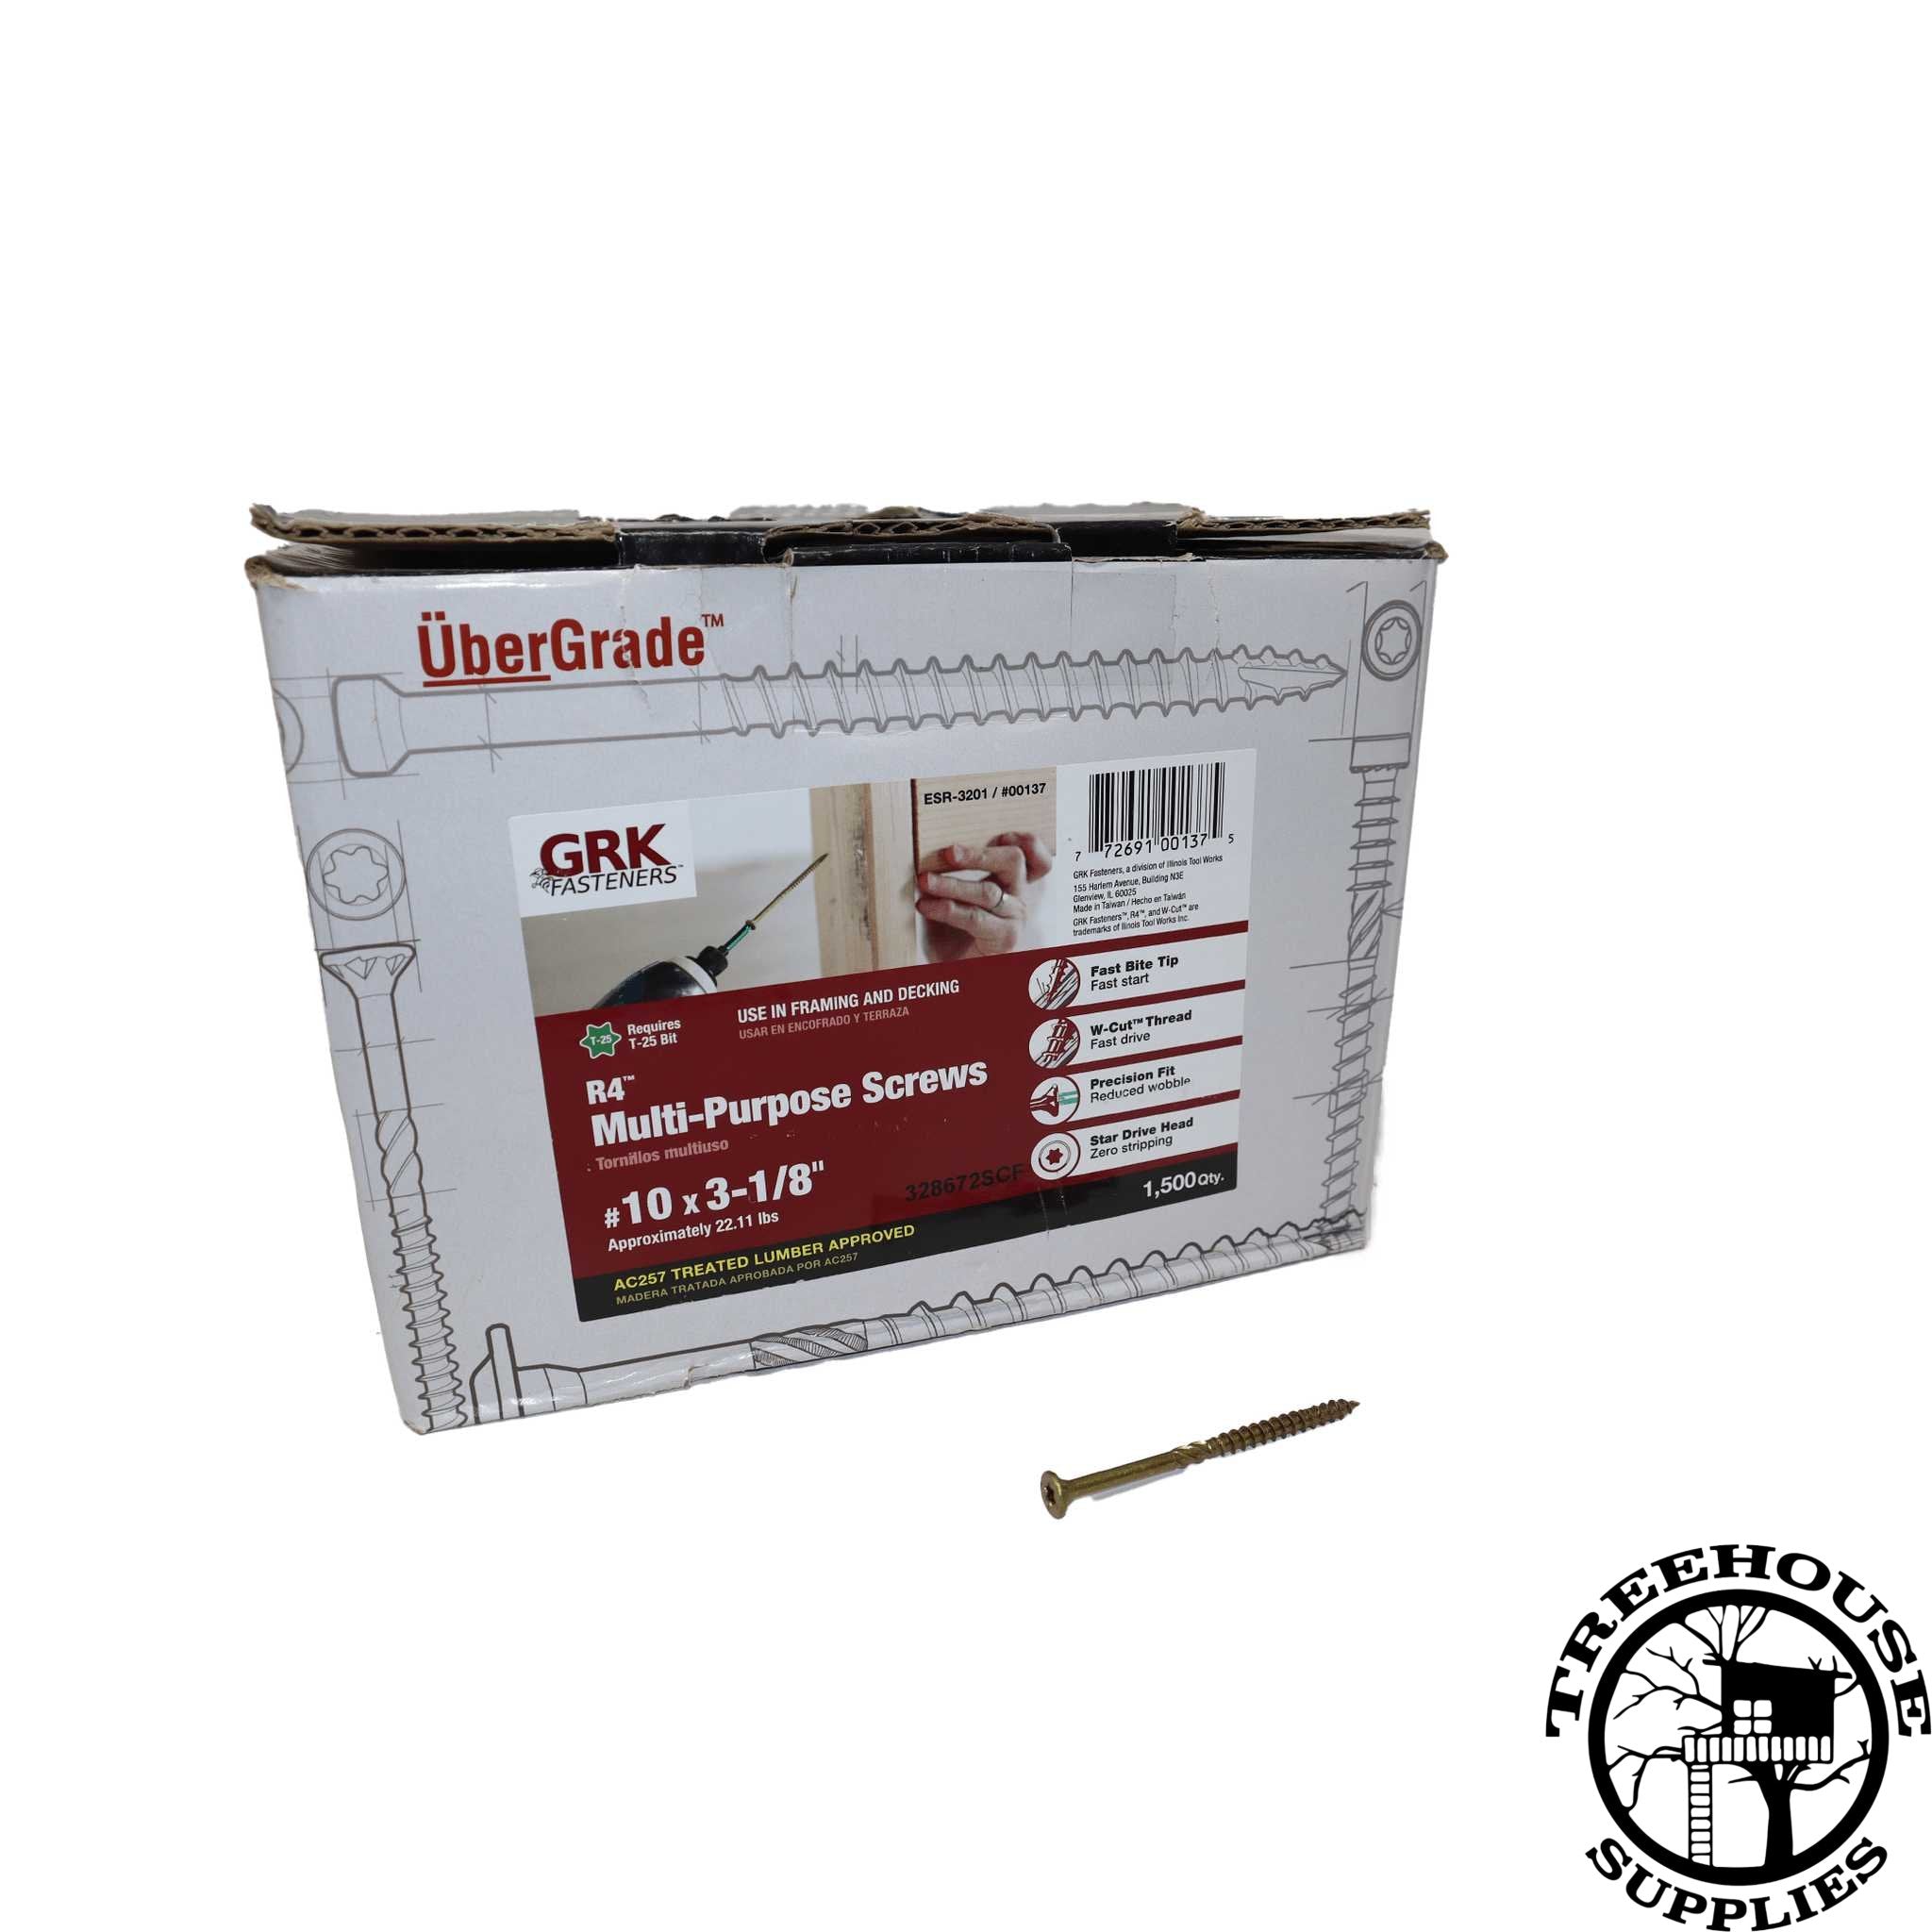 Large 1500 count box of 10 x 3-1/8" GRK Screws. White Background. Individual screw shown under box.